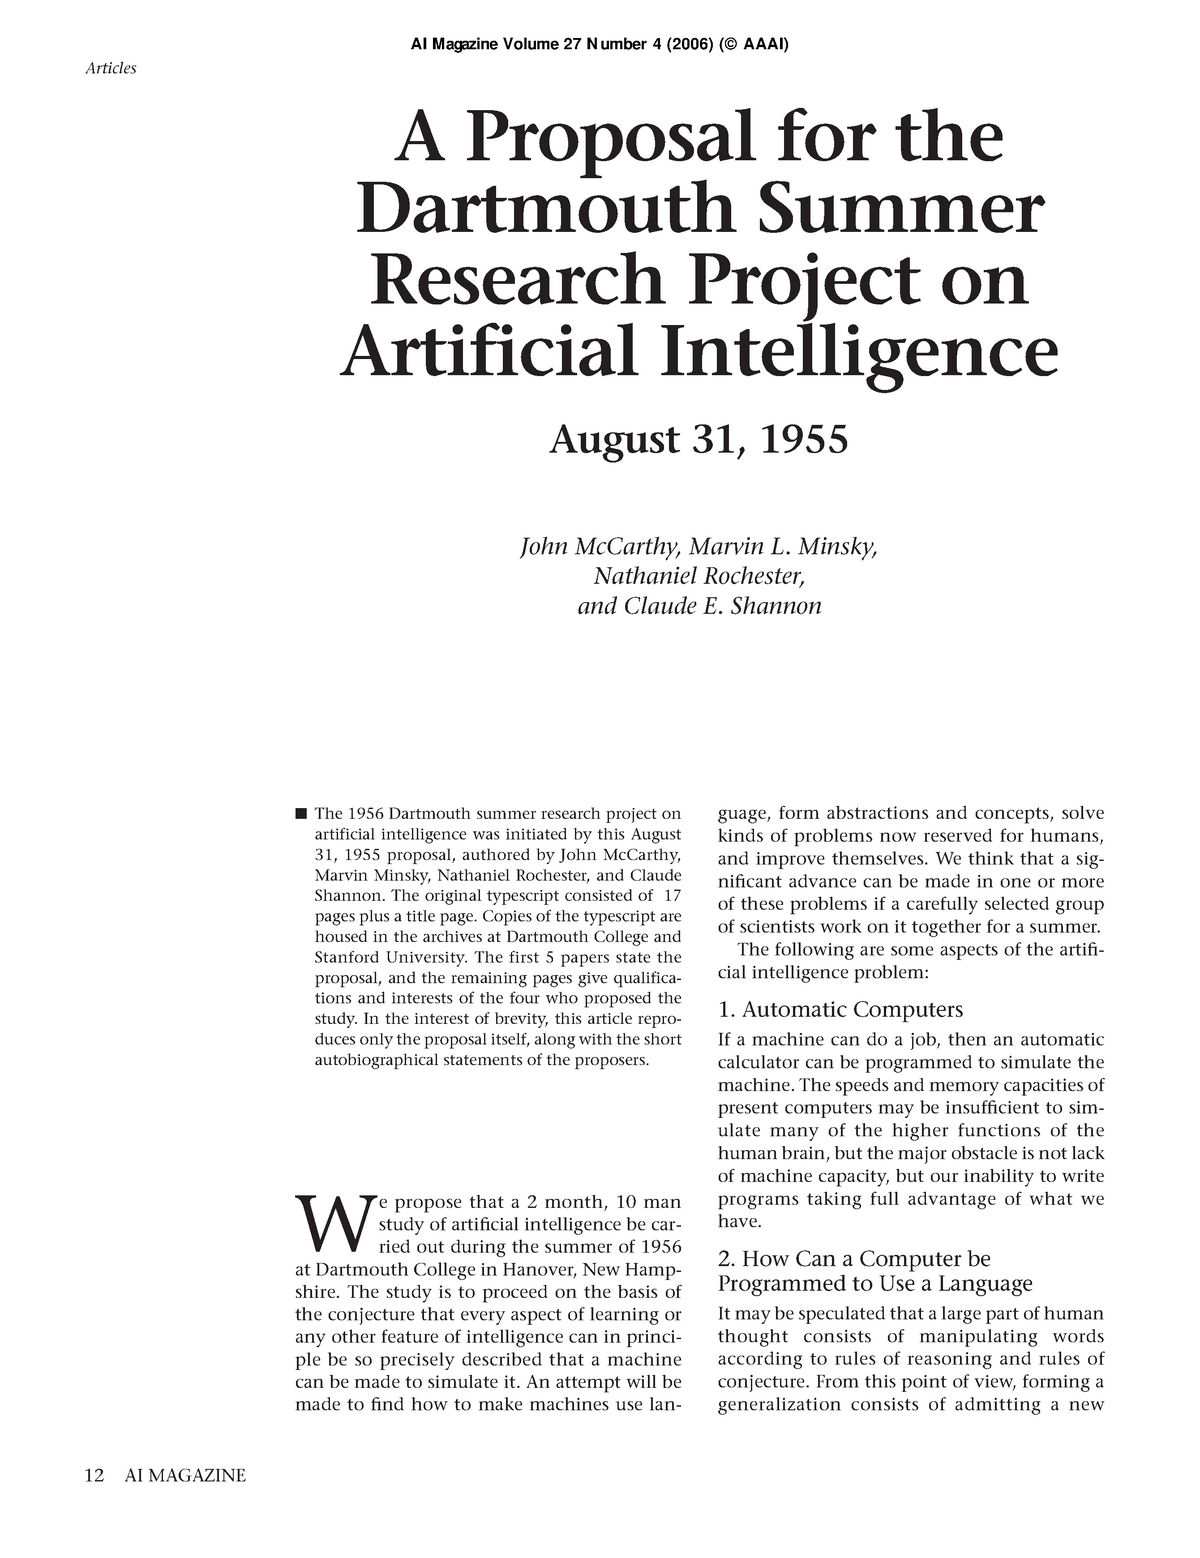 dartmouth summer research project 1956